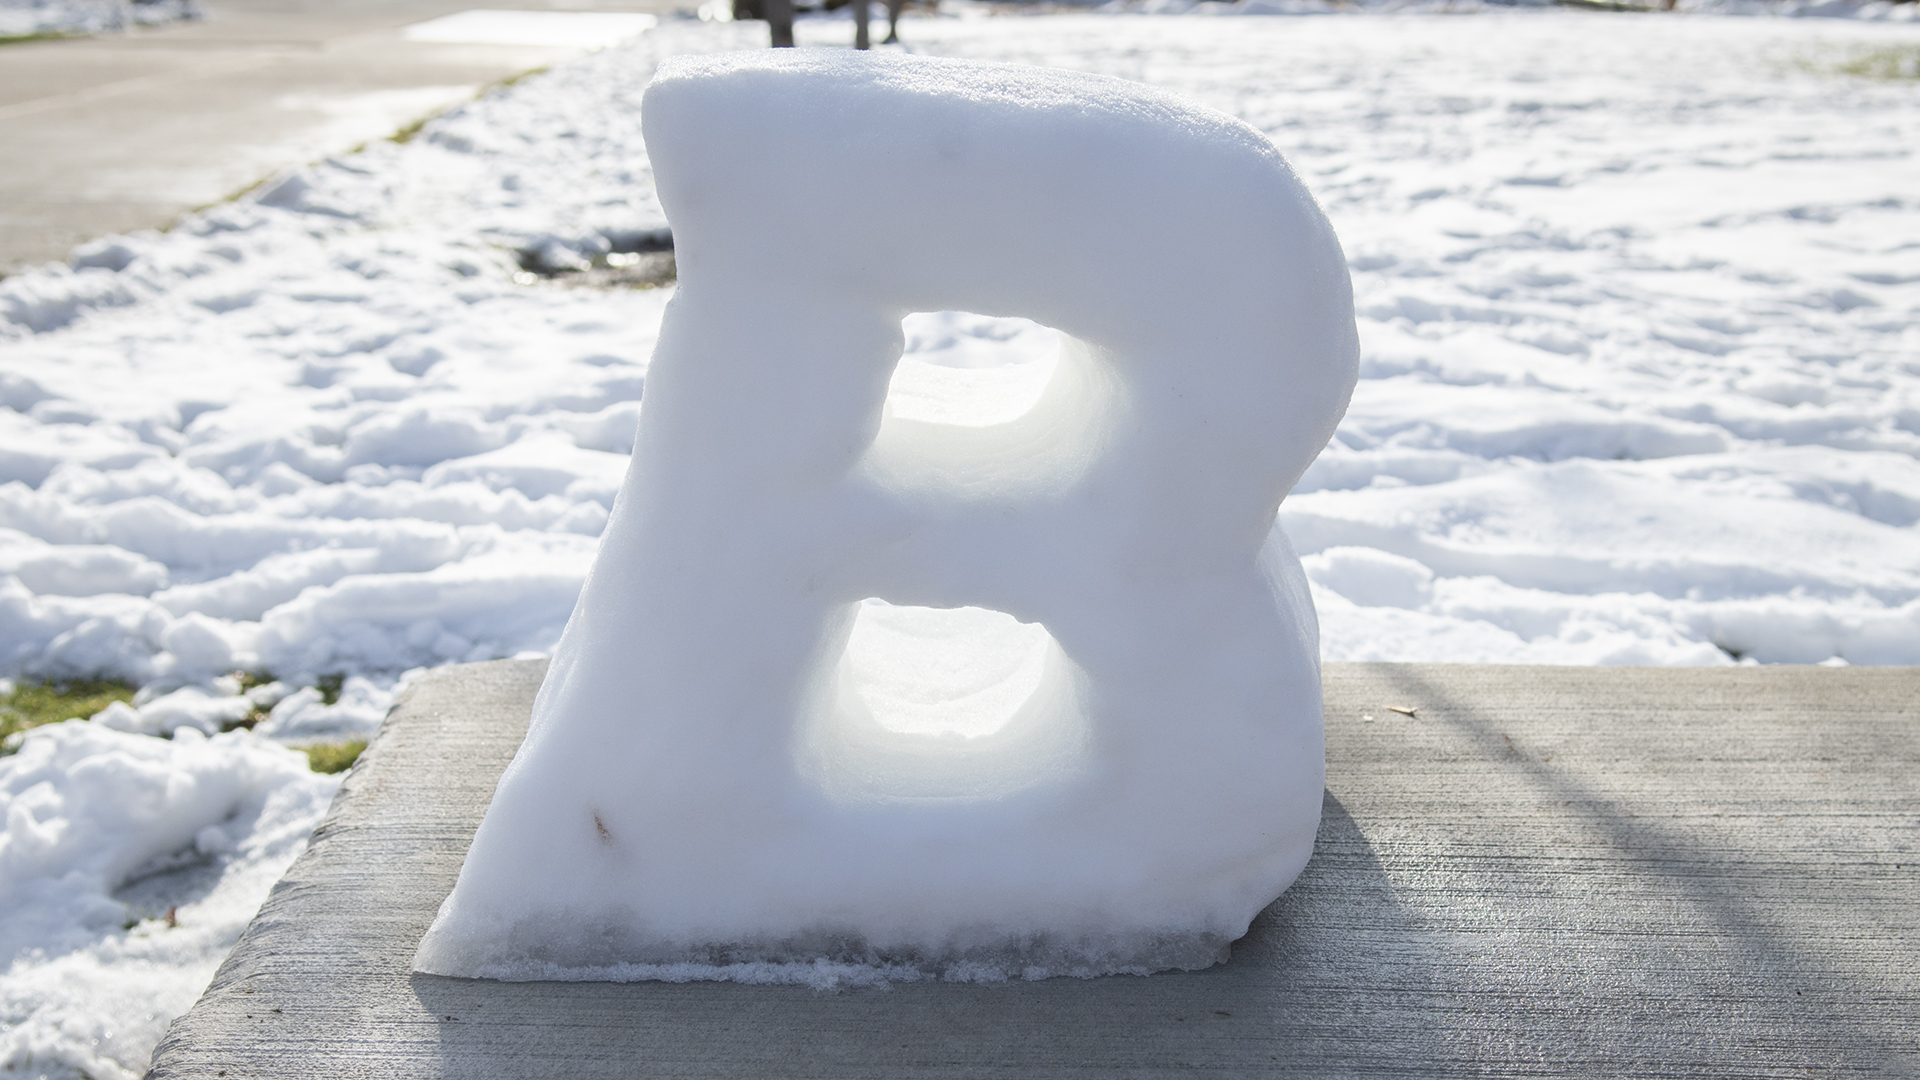 Snow sculpture of the Boise State B logo